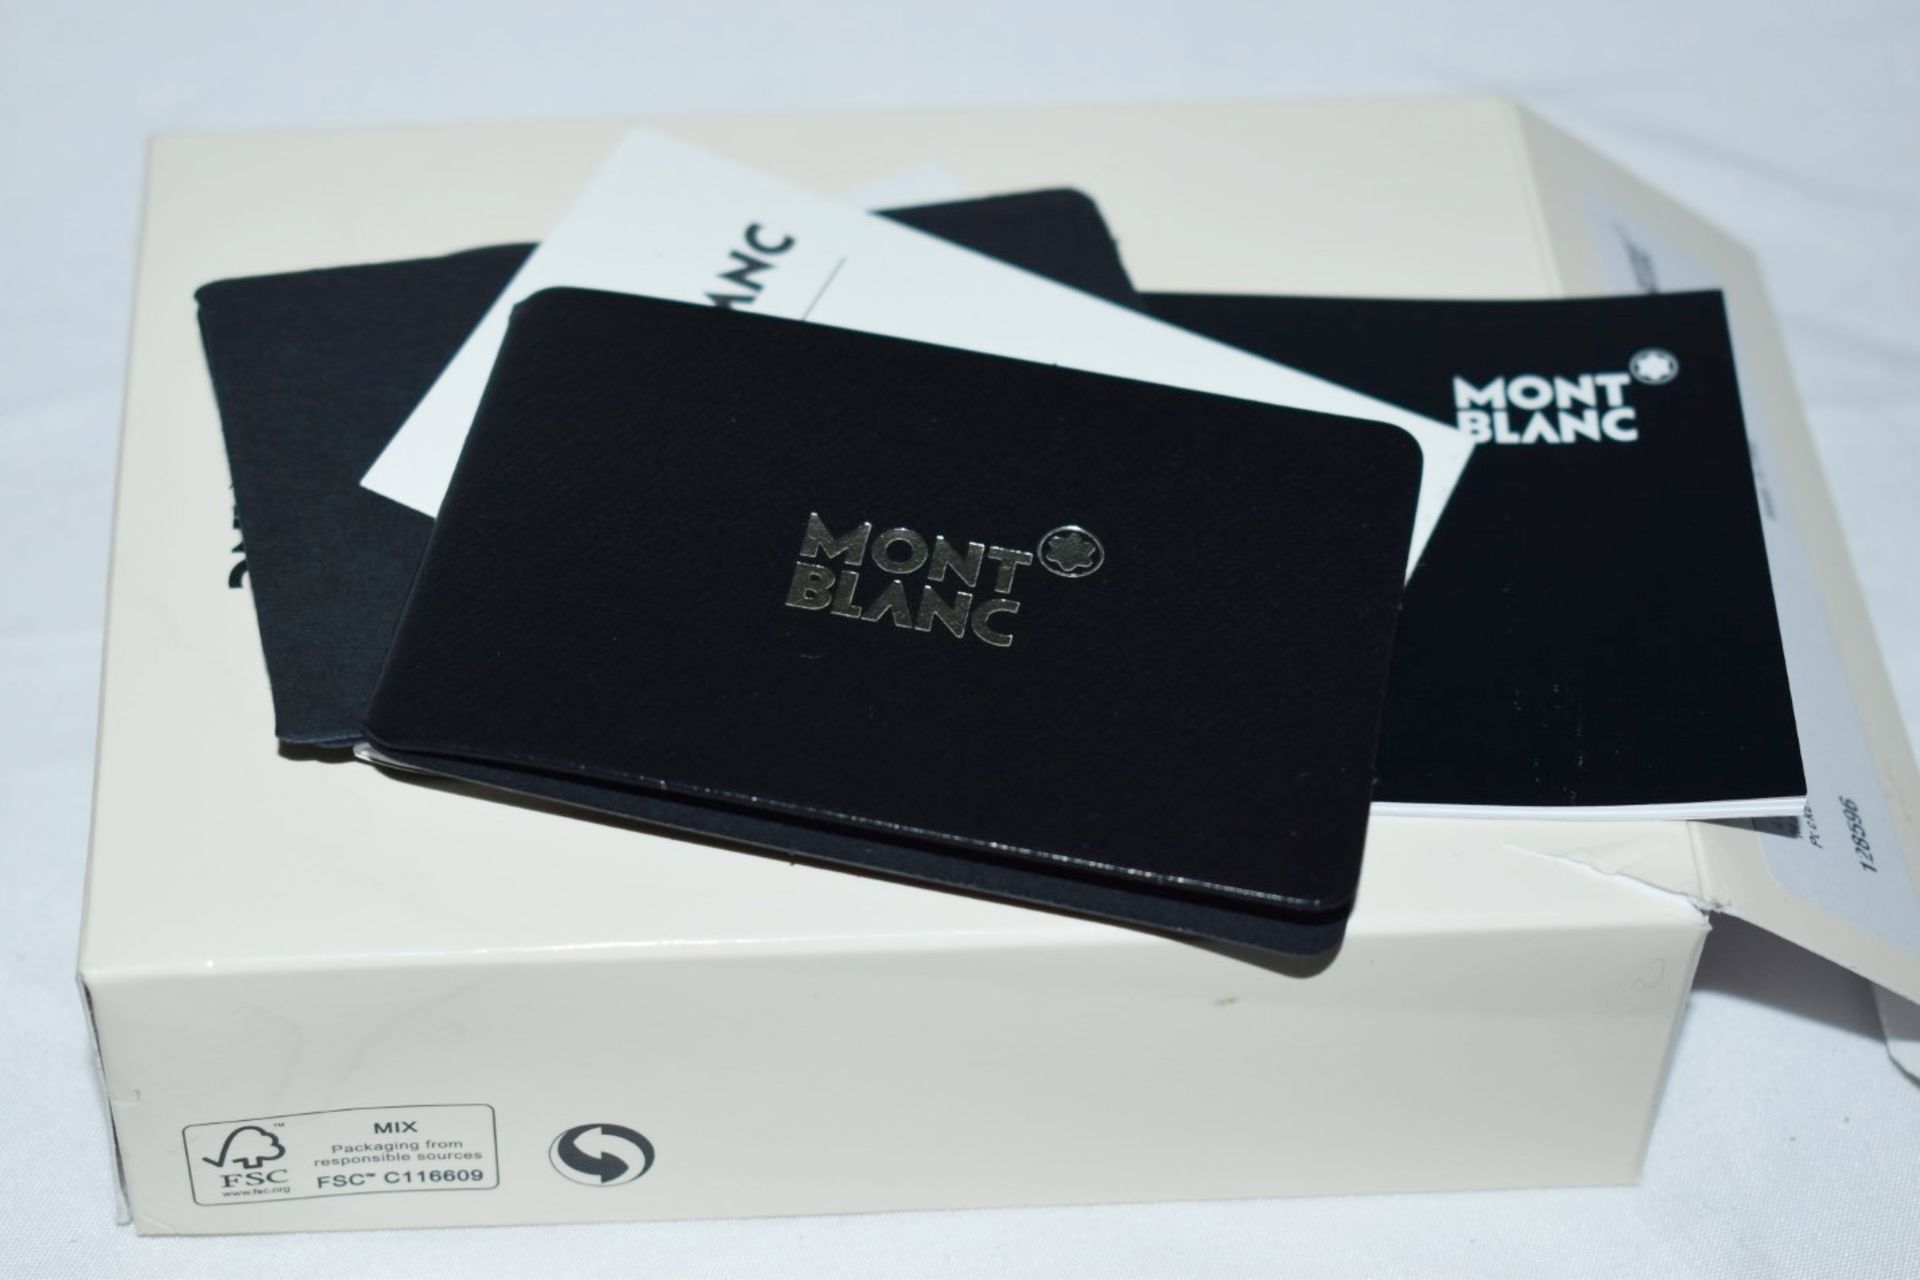 1 x MONTBLANC Sartorial Blue Luxury Leather Card Holder - Original Price £160.00 - Boxed Stock - Image 6 of 10